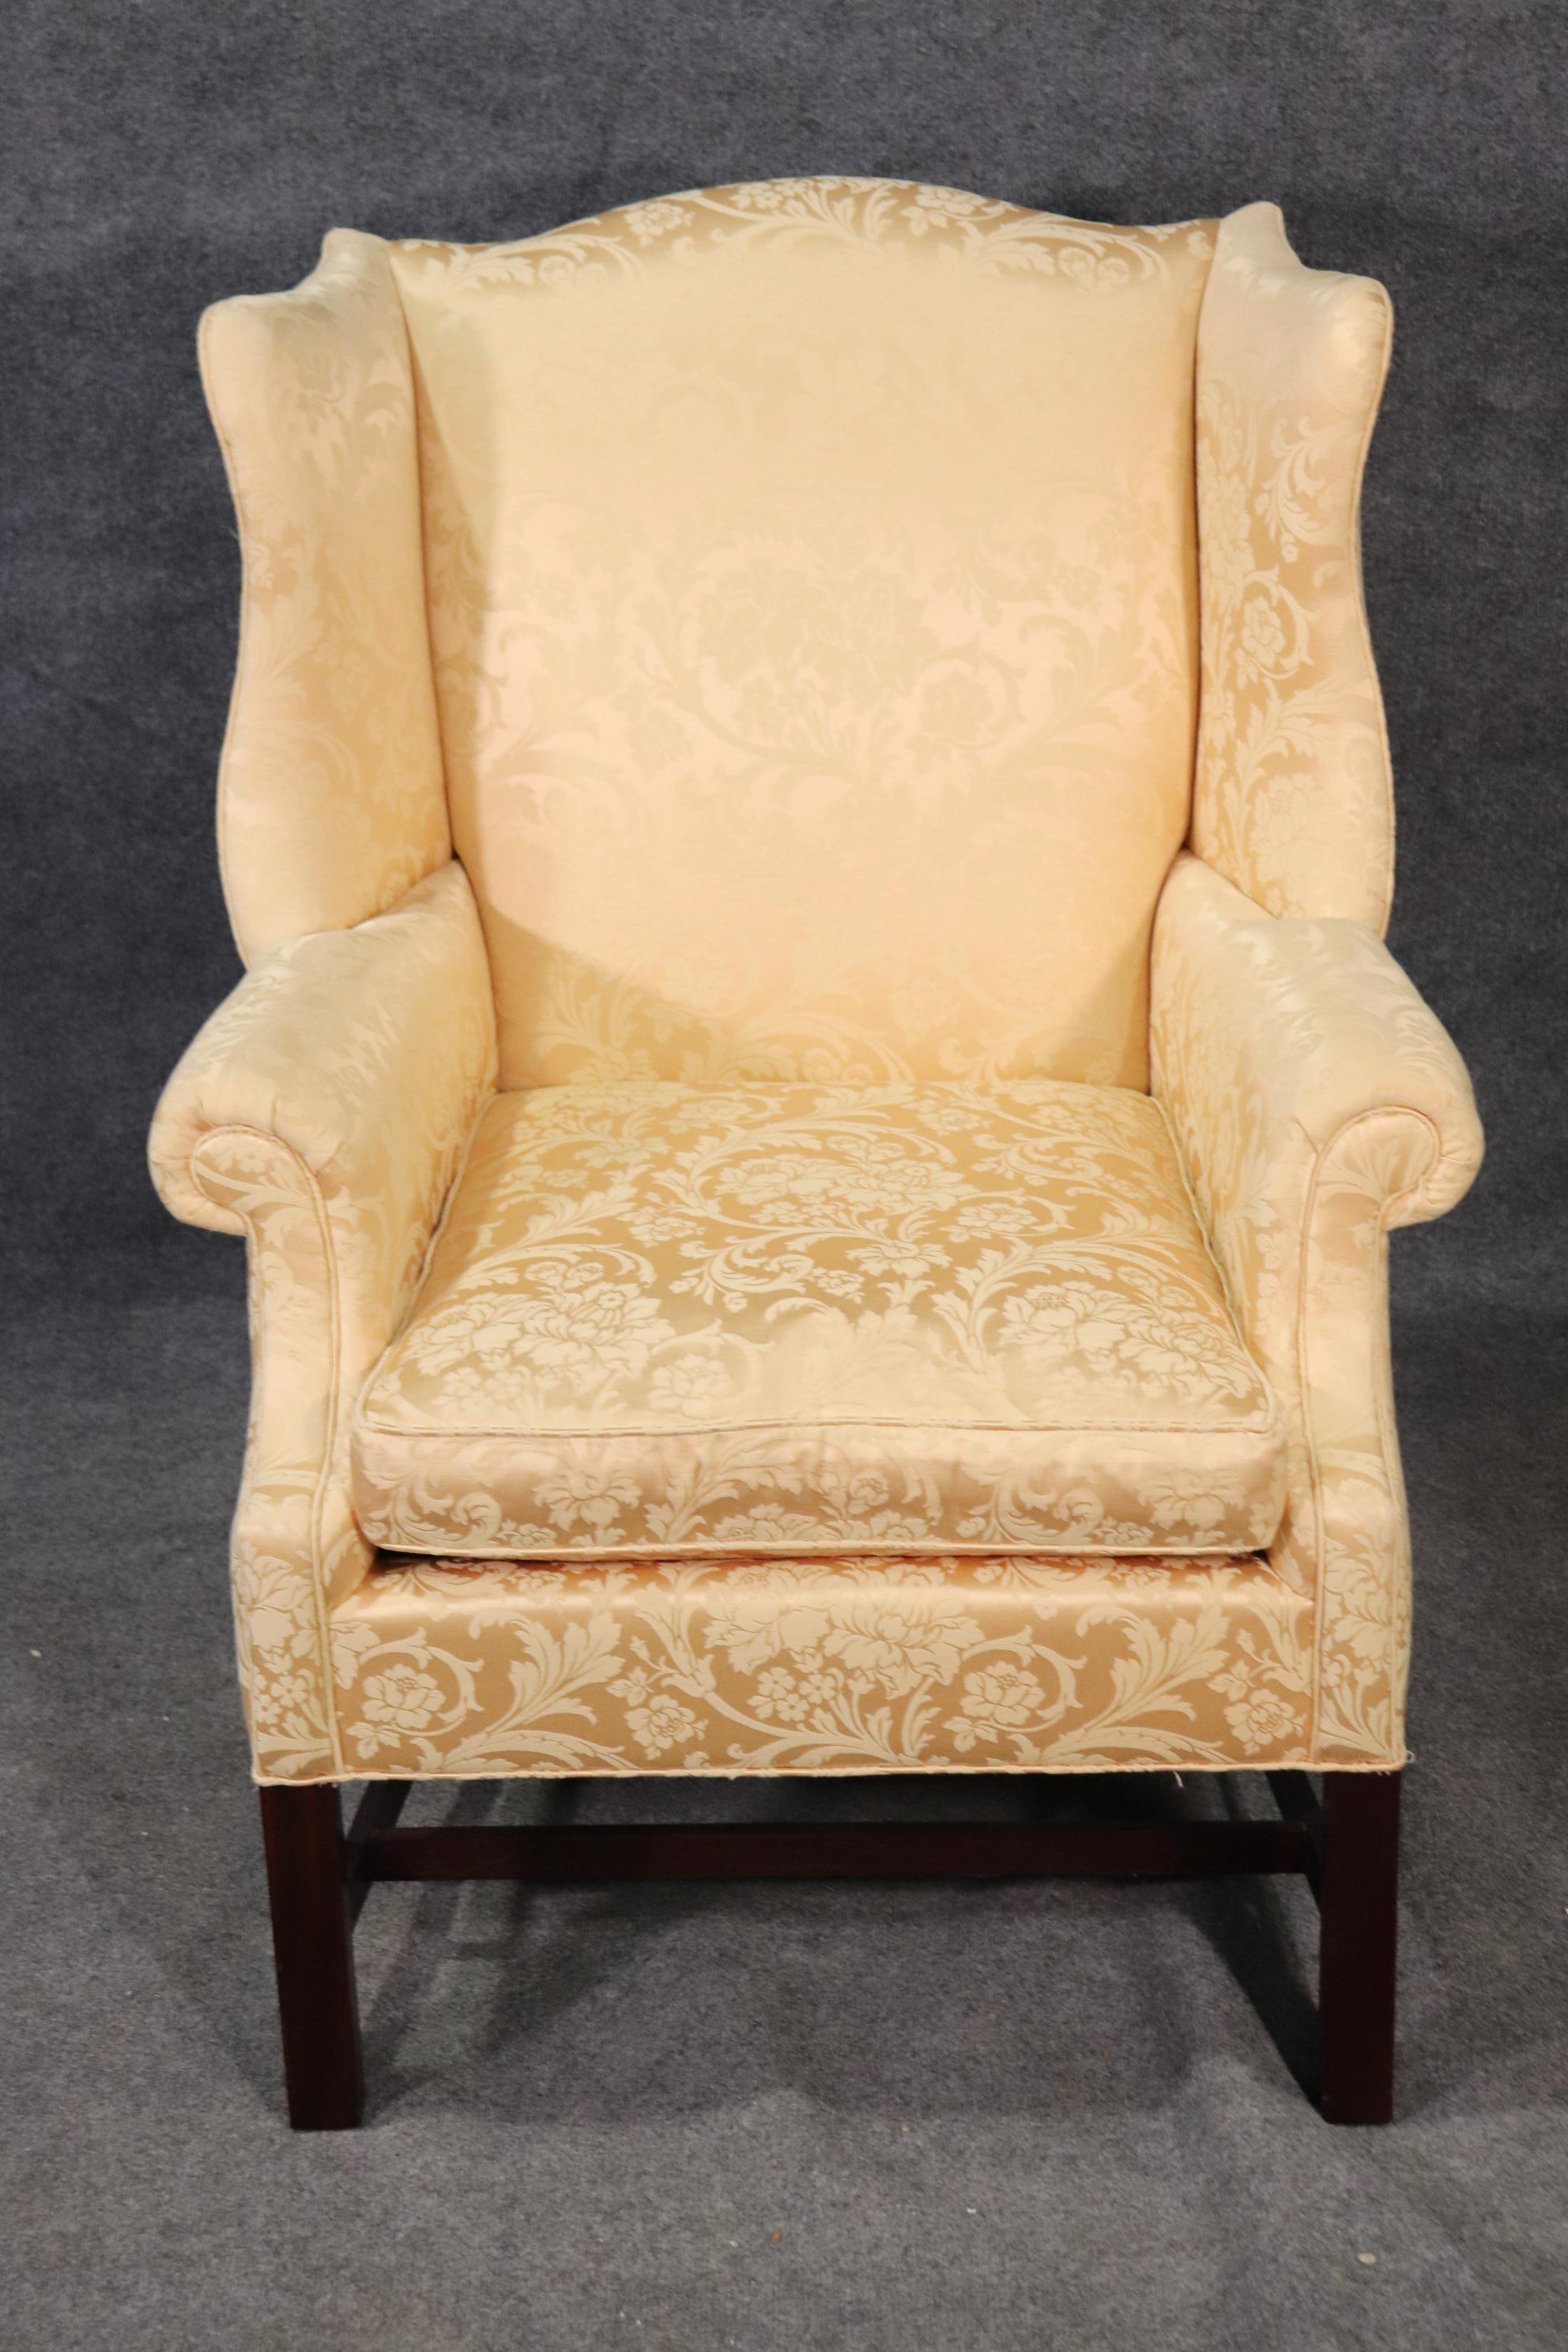 This is a nice Newport, Rhode Island style wingback chair. The chair is in good condition and measures 41 tall x 30 inches wide x 30 inches deep and the seat height is 20 inches.